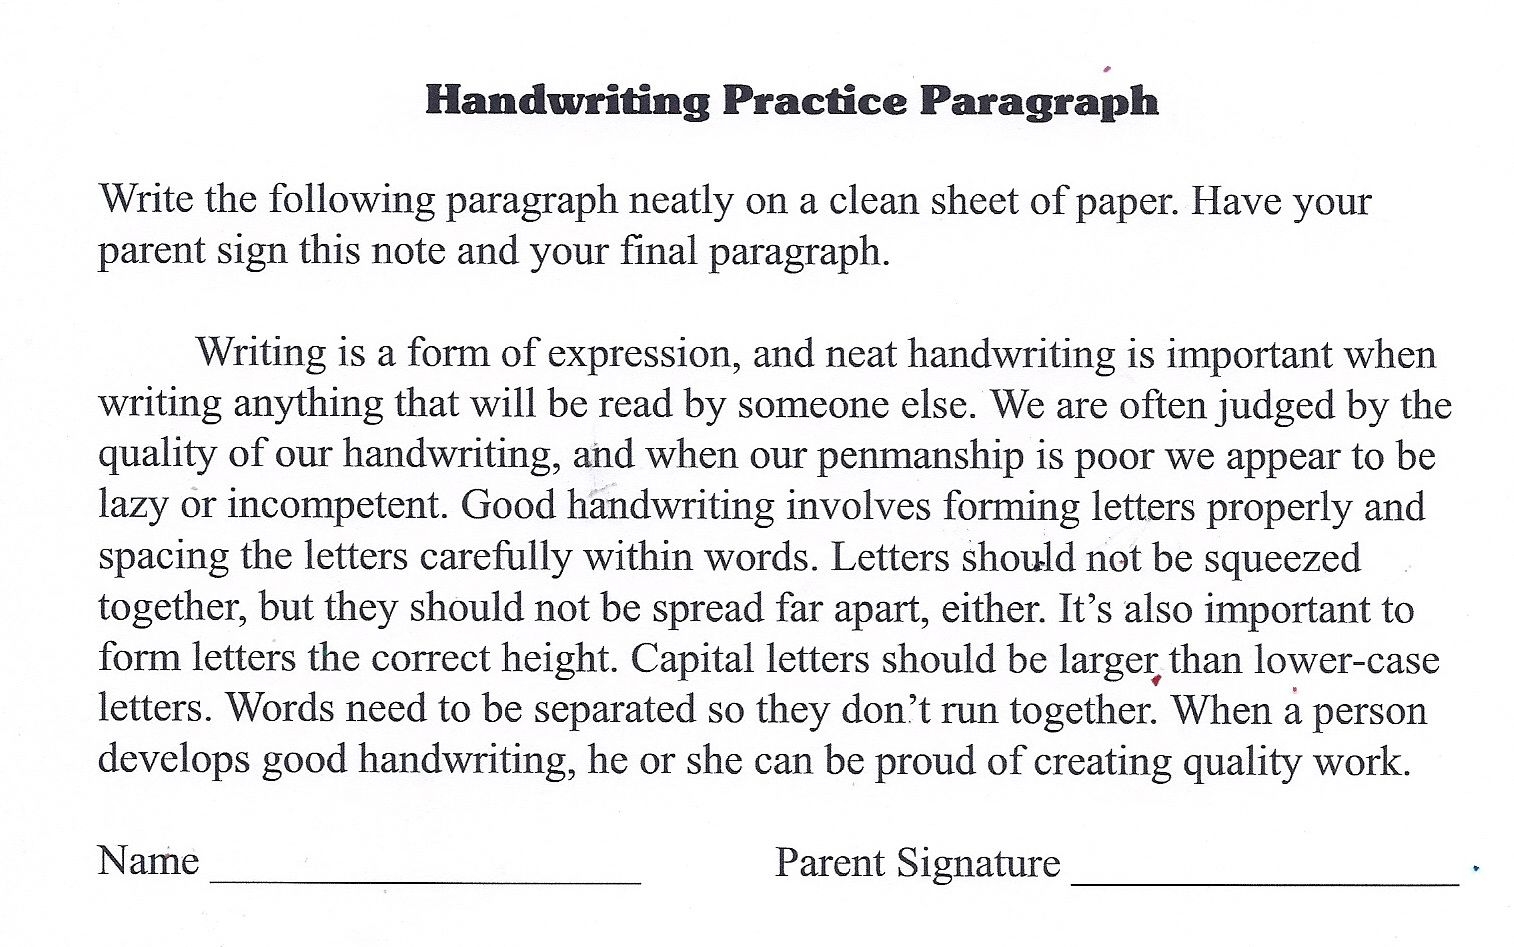 Handwriting Practice Paragraph I Found This On Www lauracandler Nice Handwriting Handwriting Practice Handwriting Practice Paper